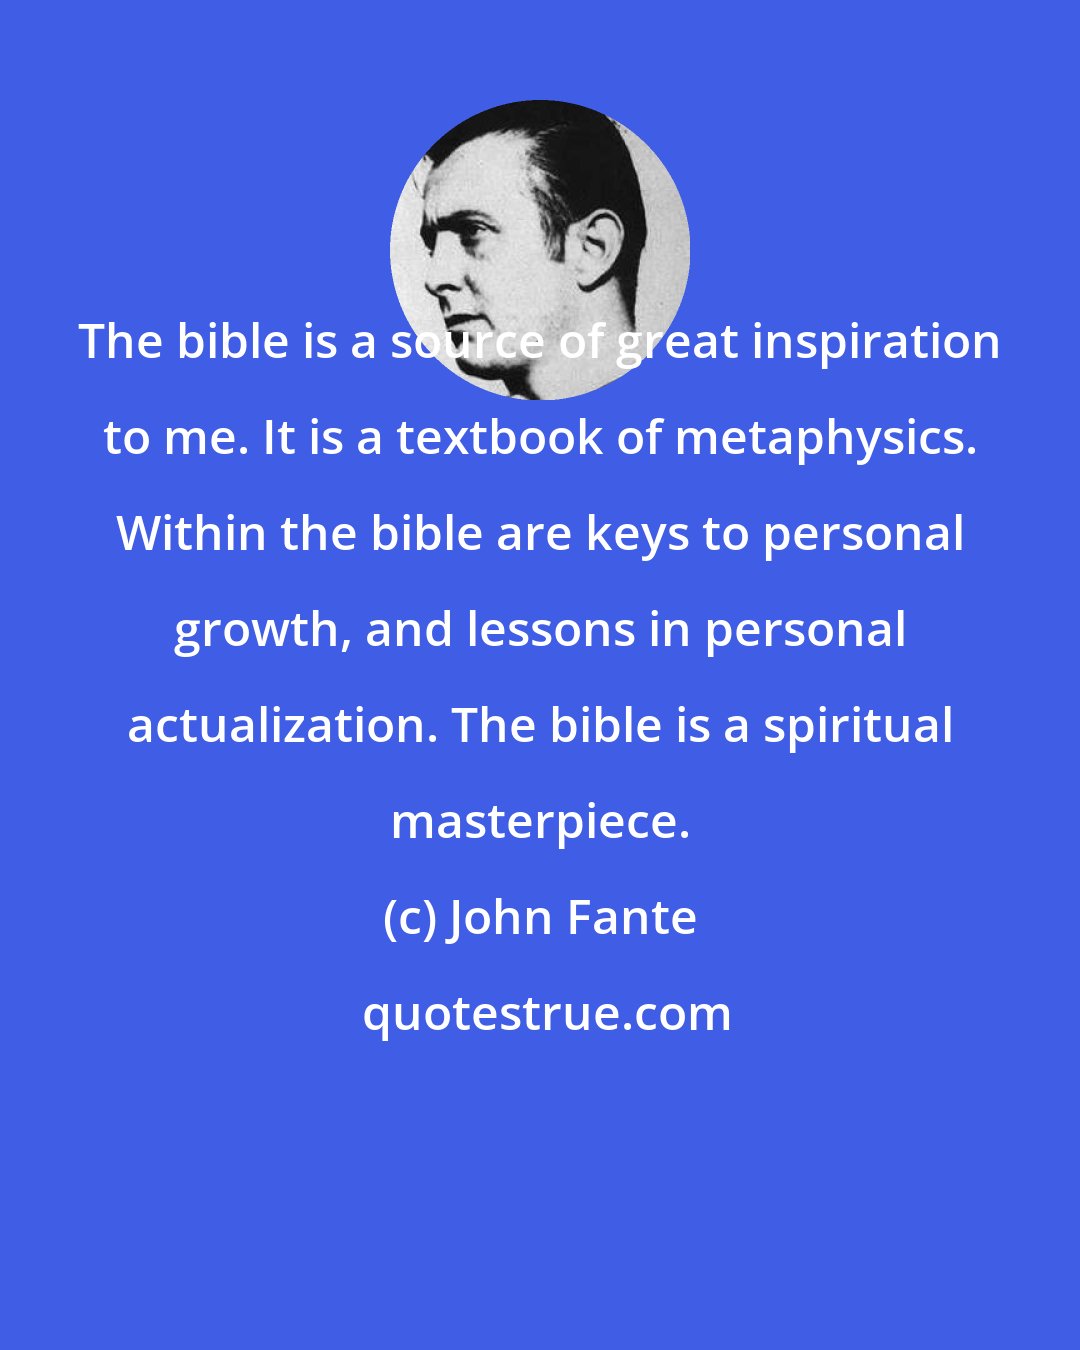 John Fante: The bible is a source of great inspiration to me. It is a textbook of metaphysics. Within the bible are keys to personal growth, and lessons in personal actualization. The bible is a spiritual masterpiece.